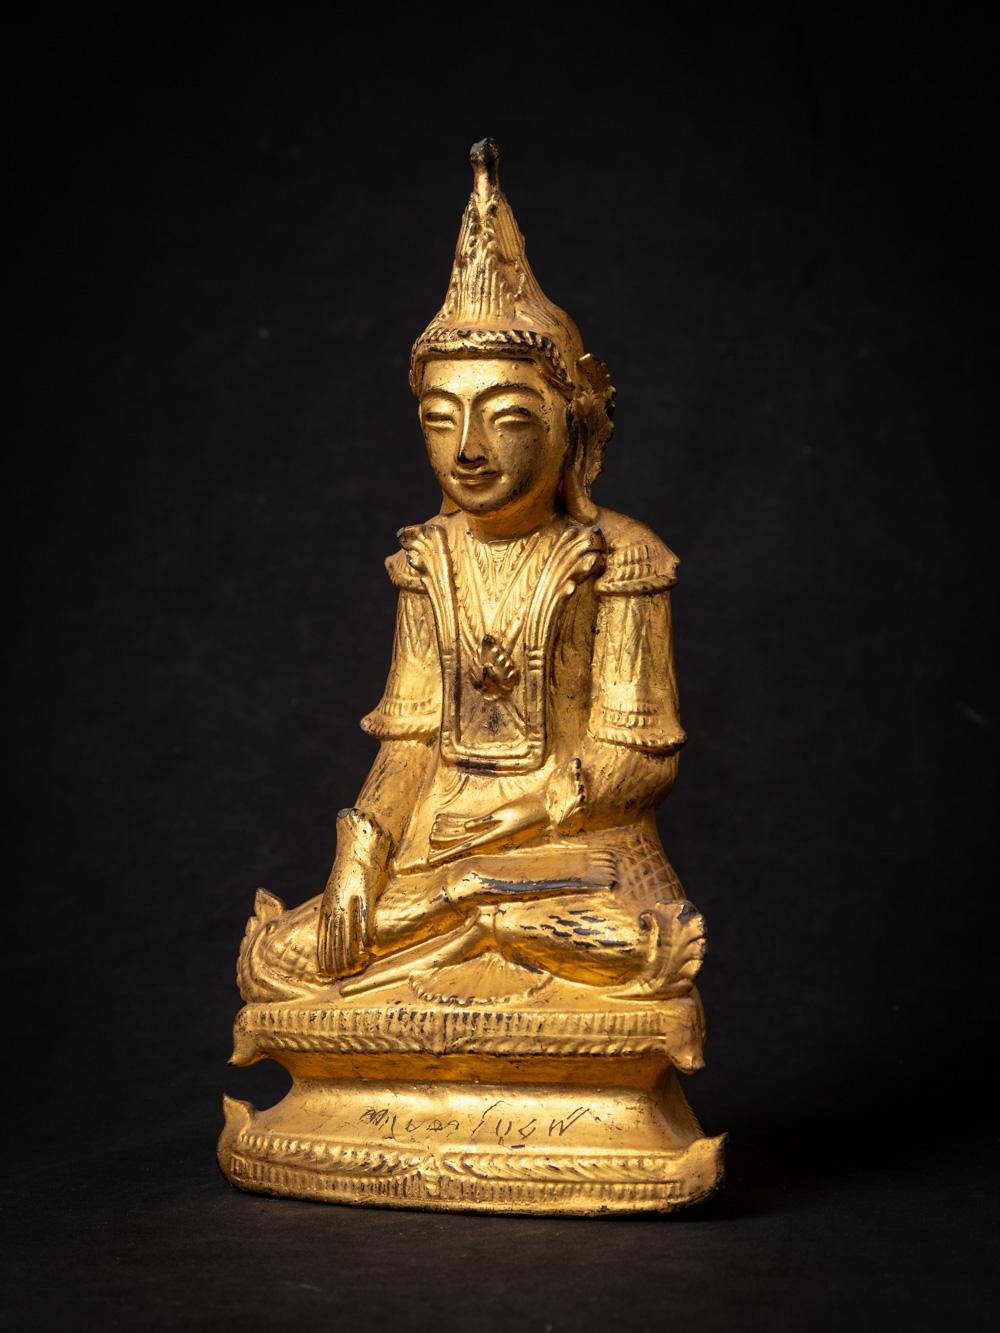 This antique wooden Burmese Buddha statue is a remarkable piece of art and spirituality. Crafted from wood, it stands at a height of 30.5 cm, with dimensions of 17 cm in width and 8.3 cm in depth. The statue is adorned with the radiant beauty of